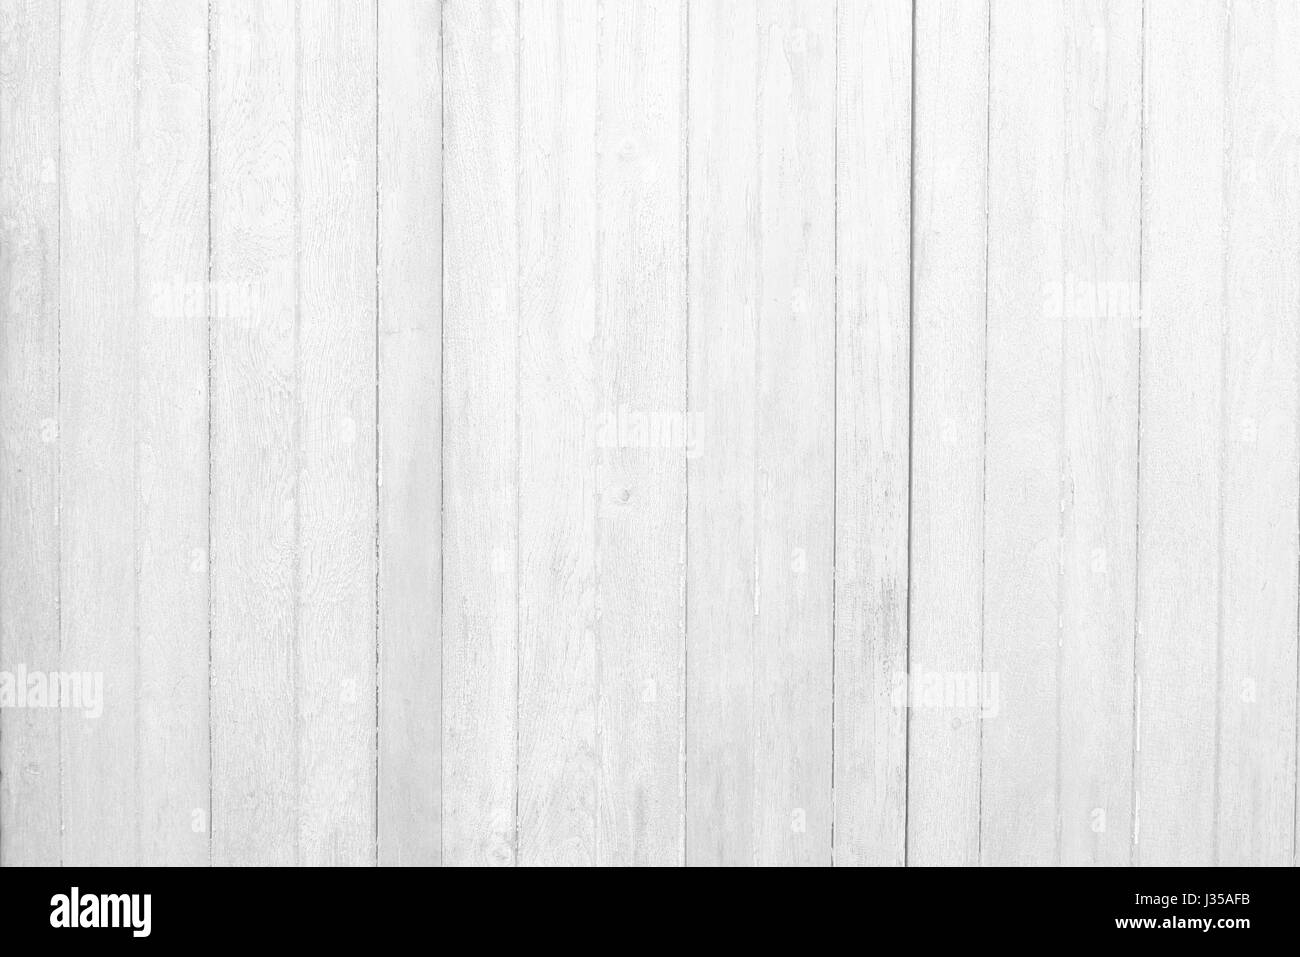 White Wood Texture Wall Background. Stock Photo